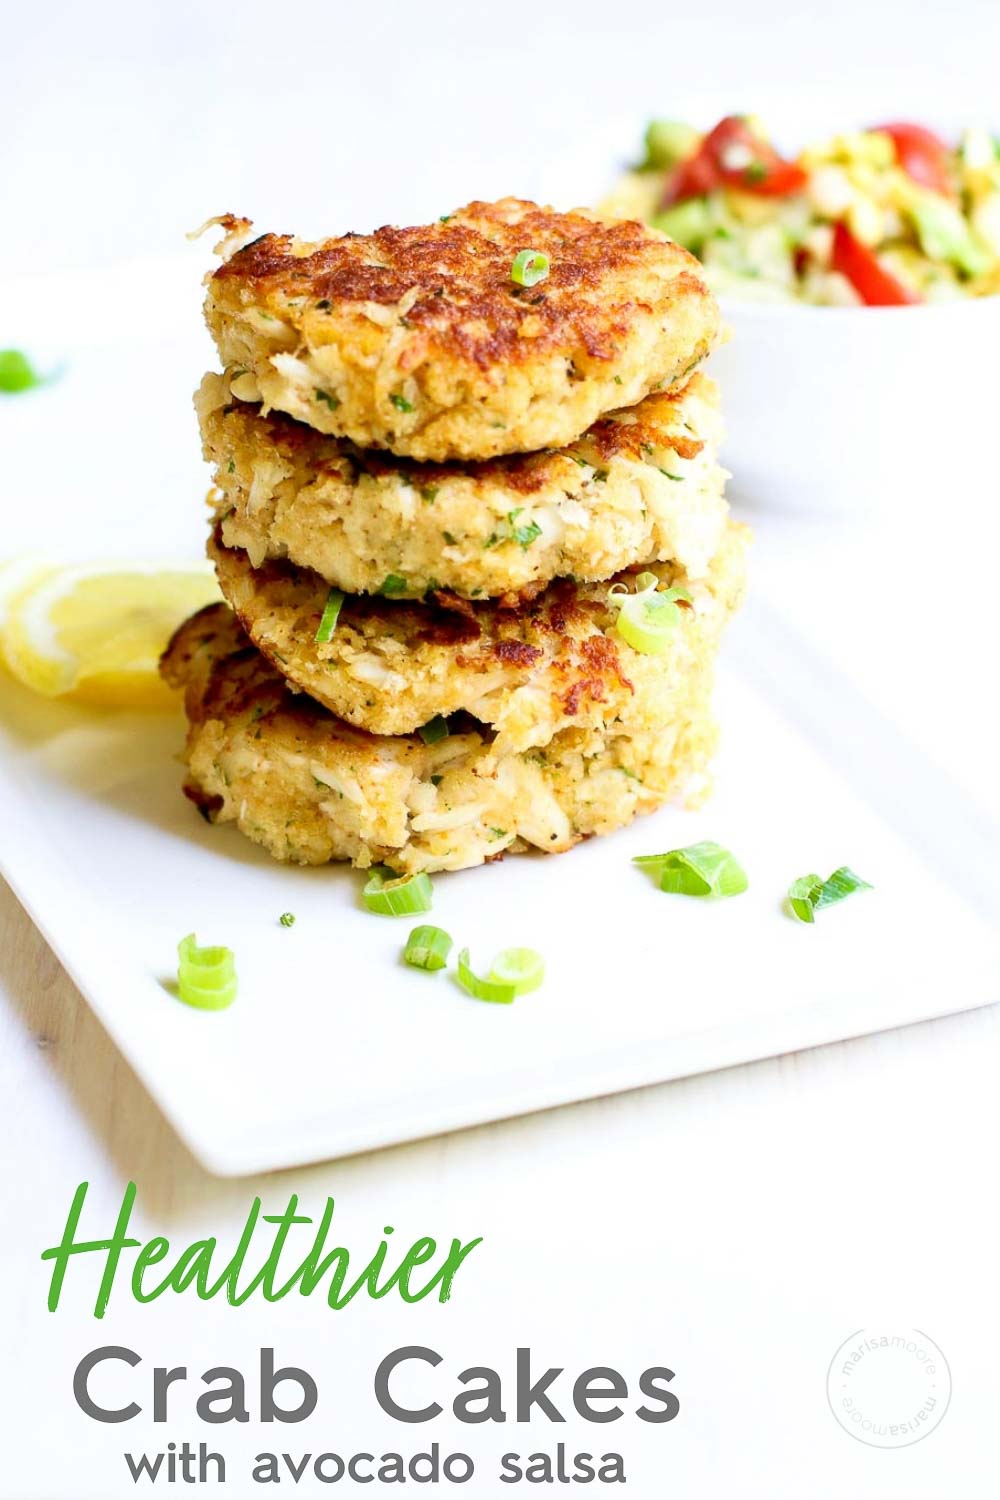 Healthier Crab Cakes with avocado salsa in back